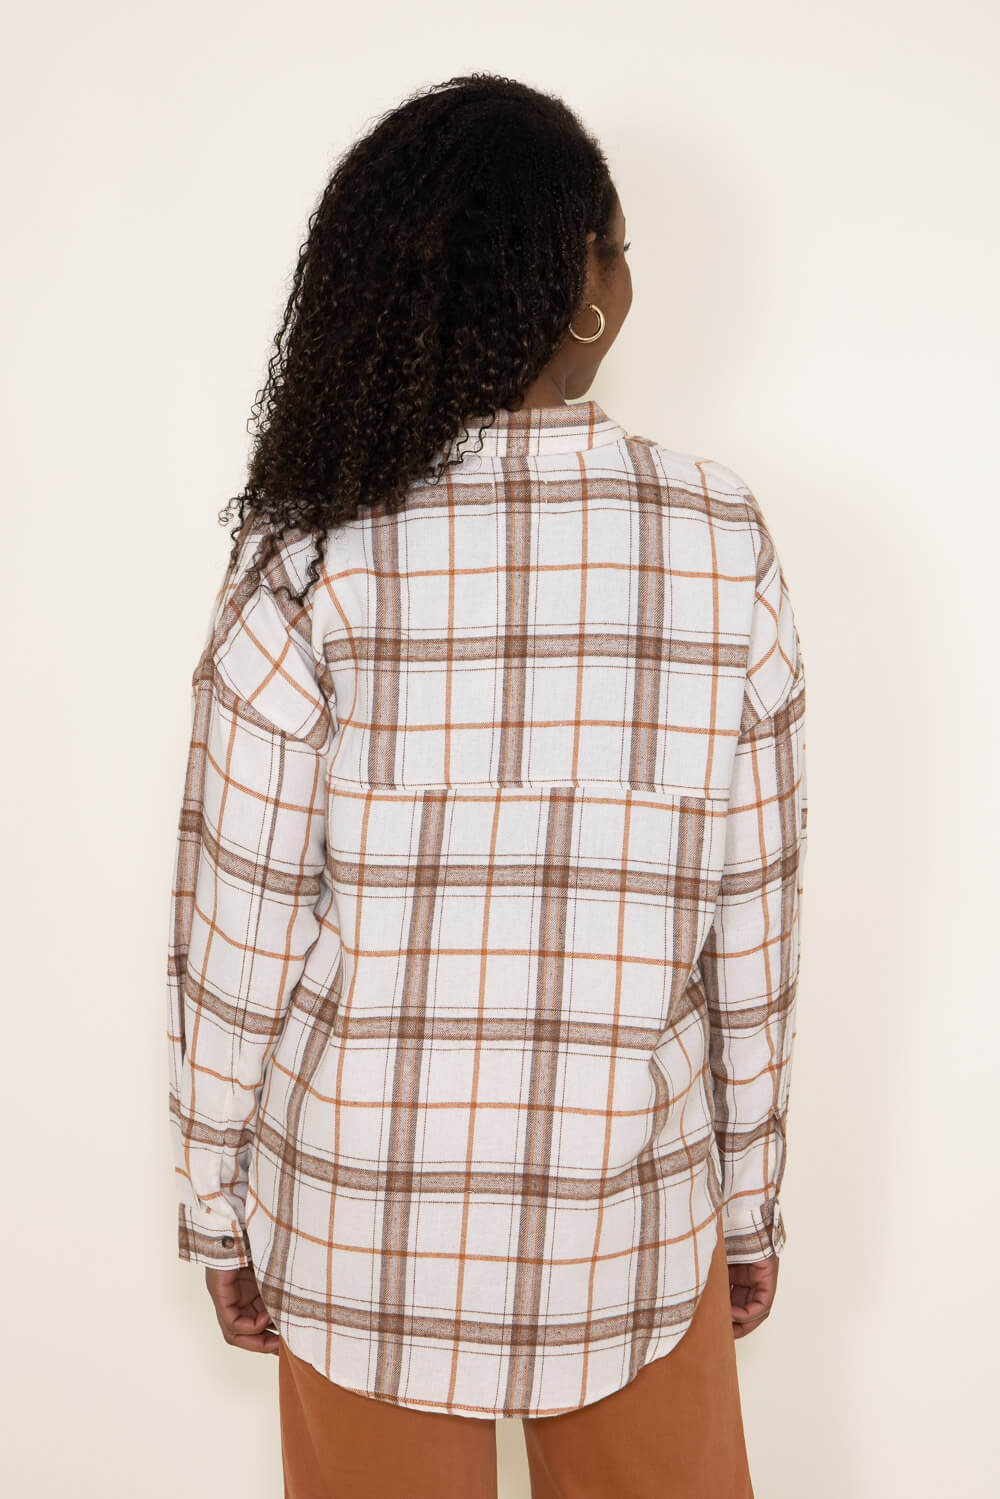 Thread & Supply Flannel Plaid Shirt for Women in White and Sage